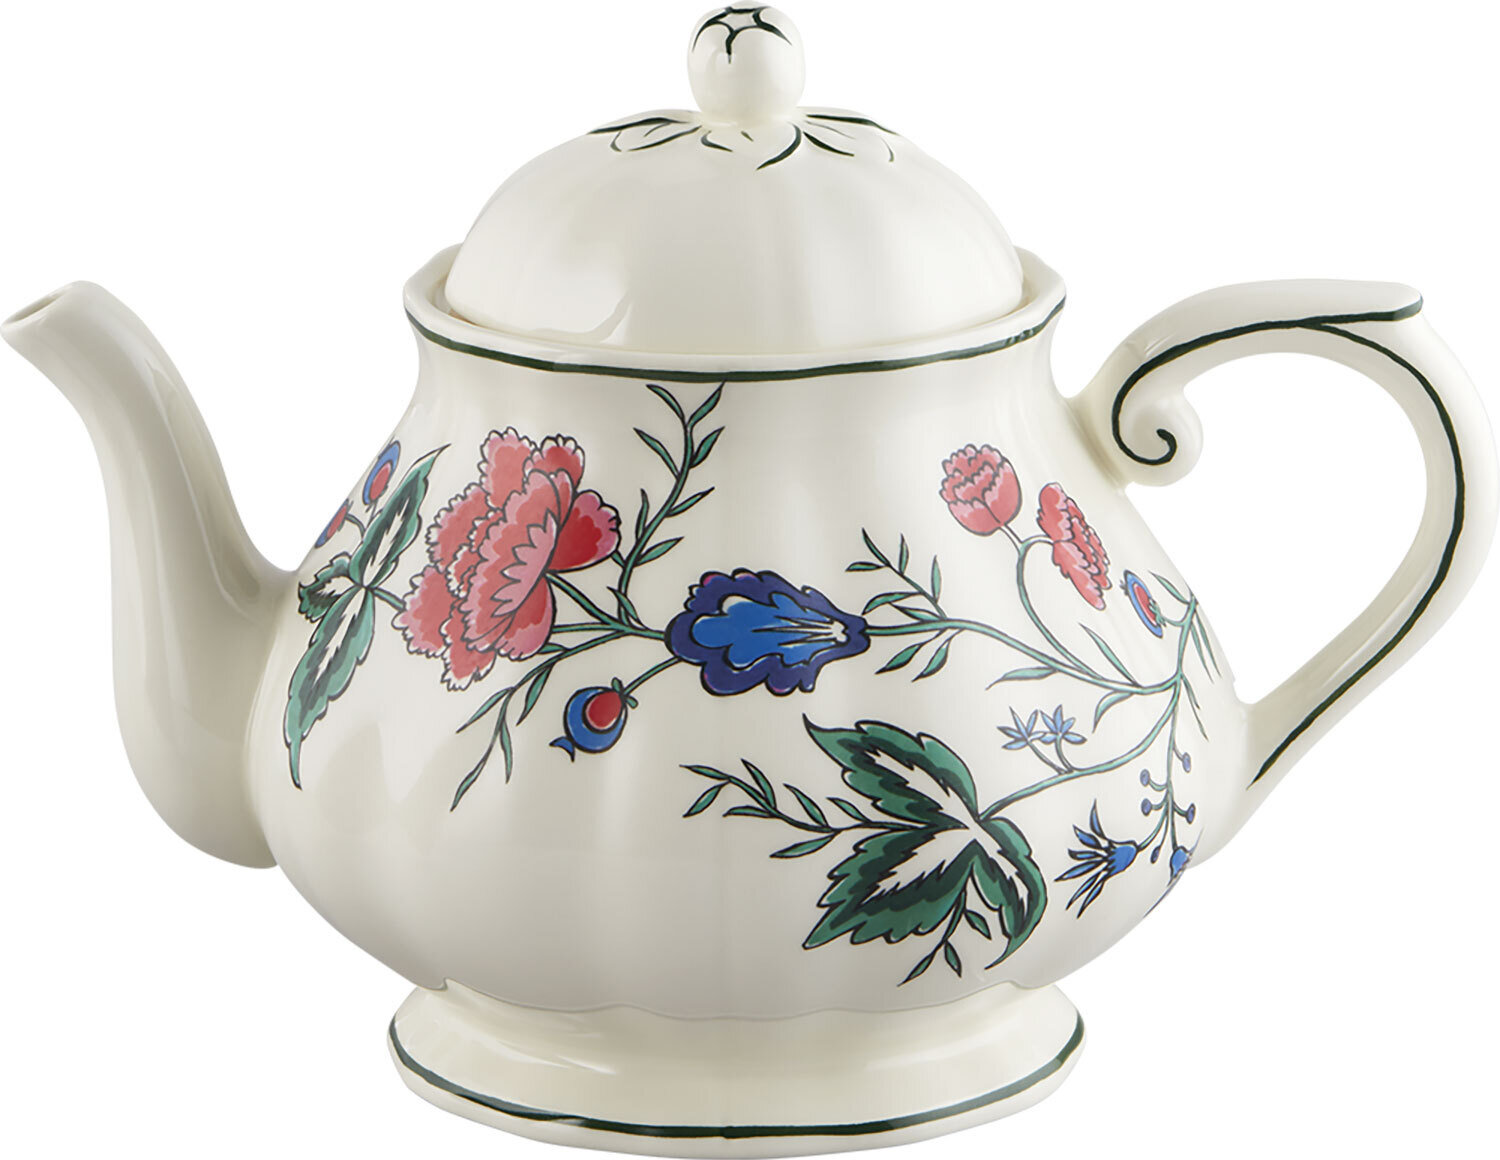 Gien Dominote Hand Painted Teapot 1846CTH248